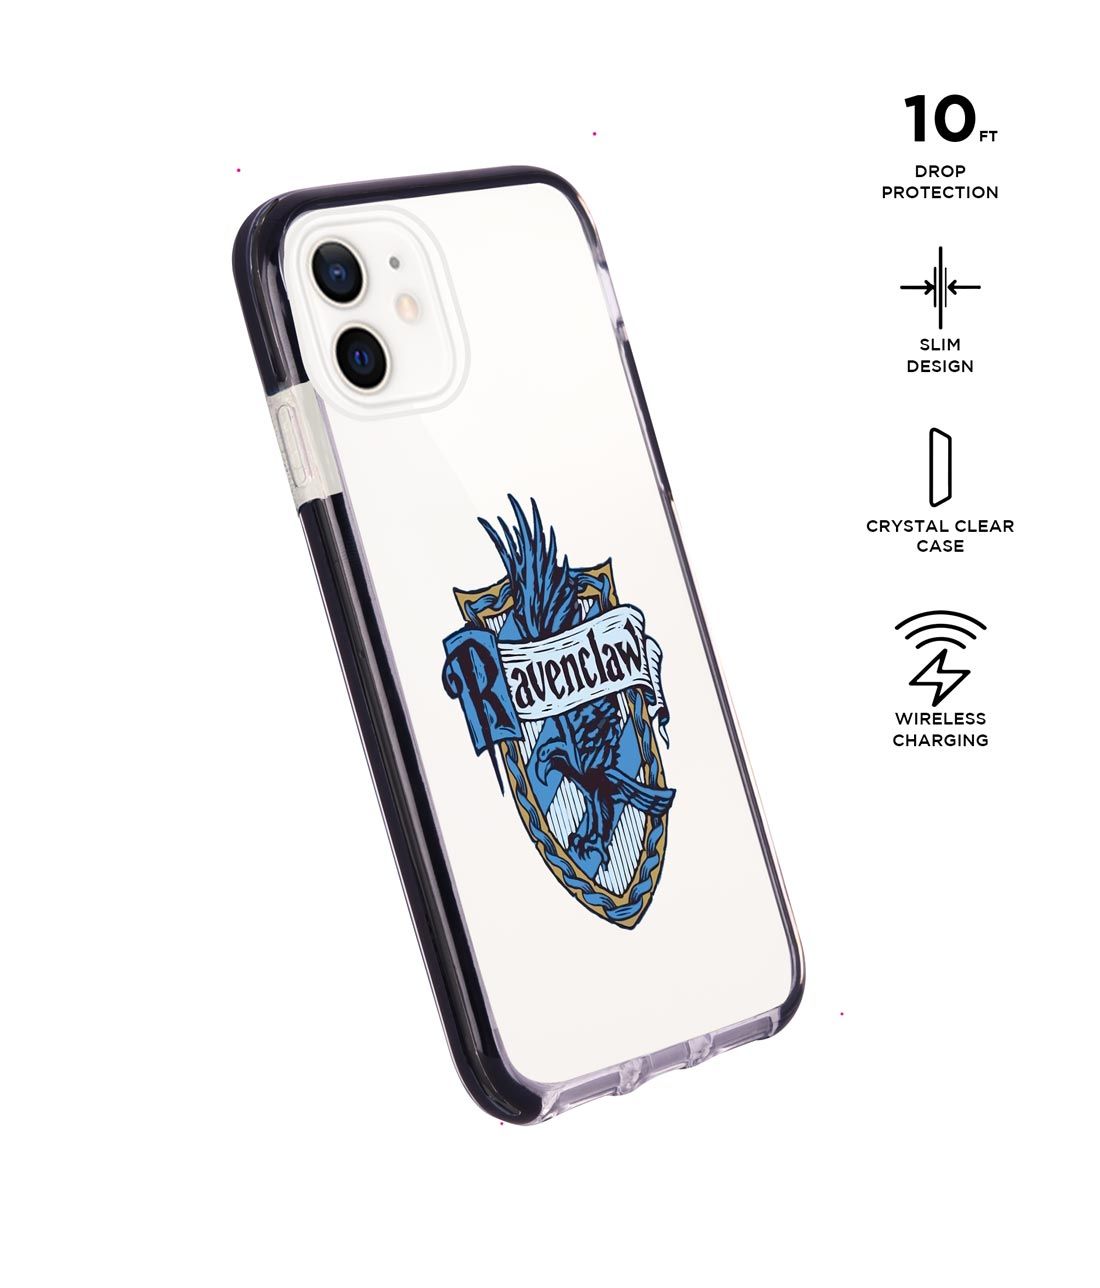 Crest Ravenclaw - Extreme Case for iPhone 12